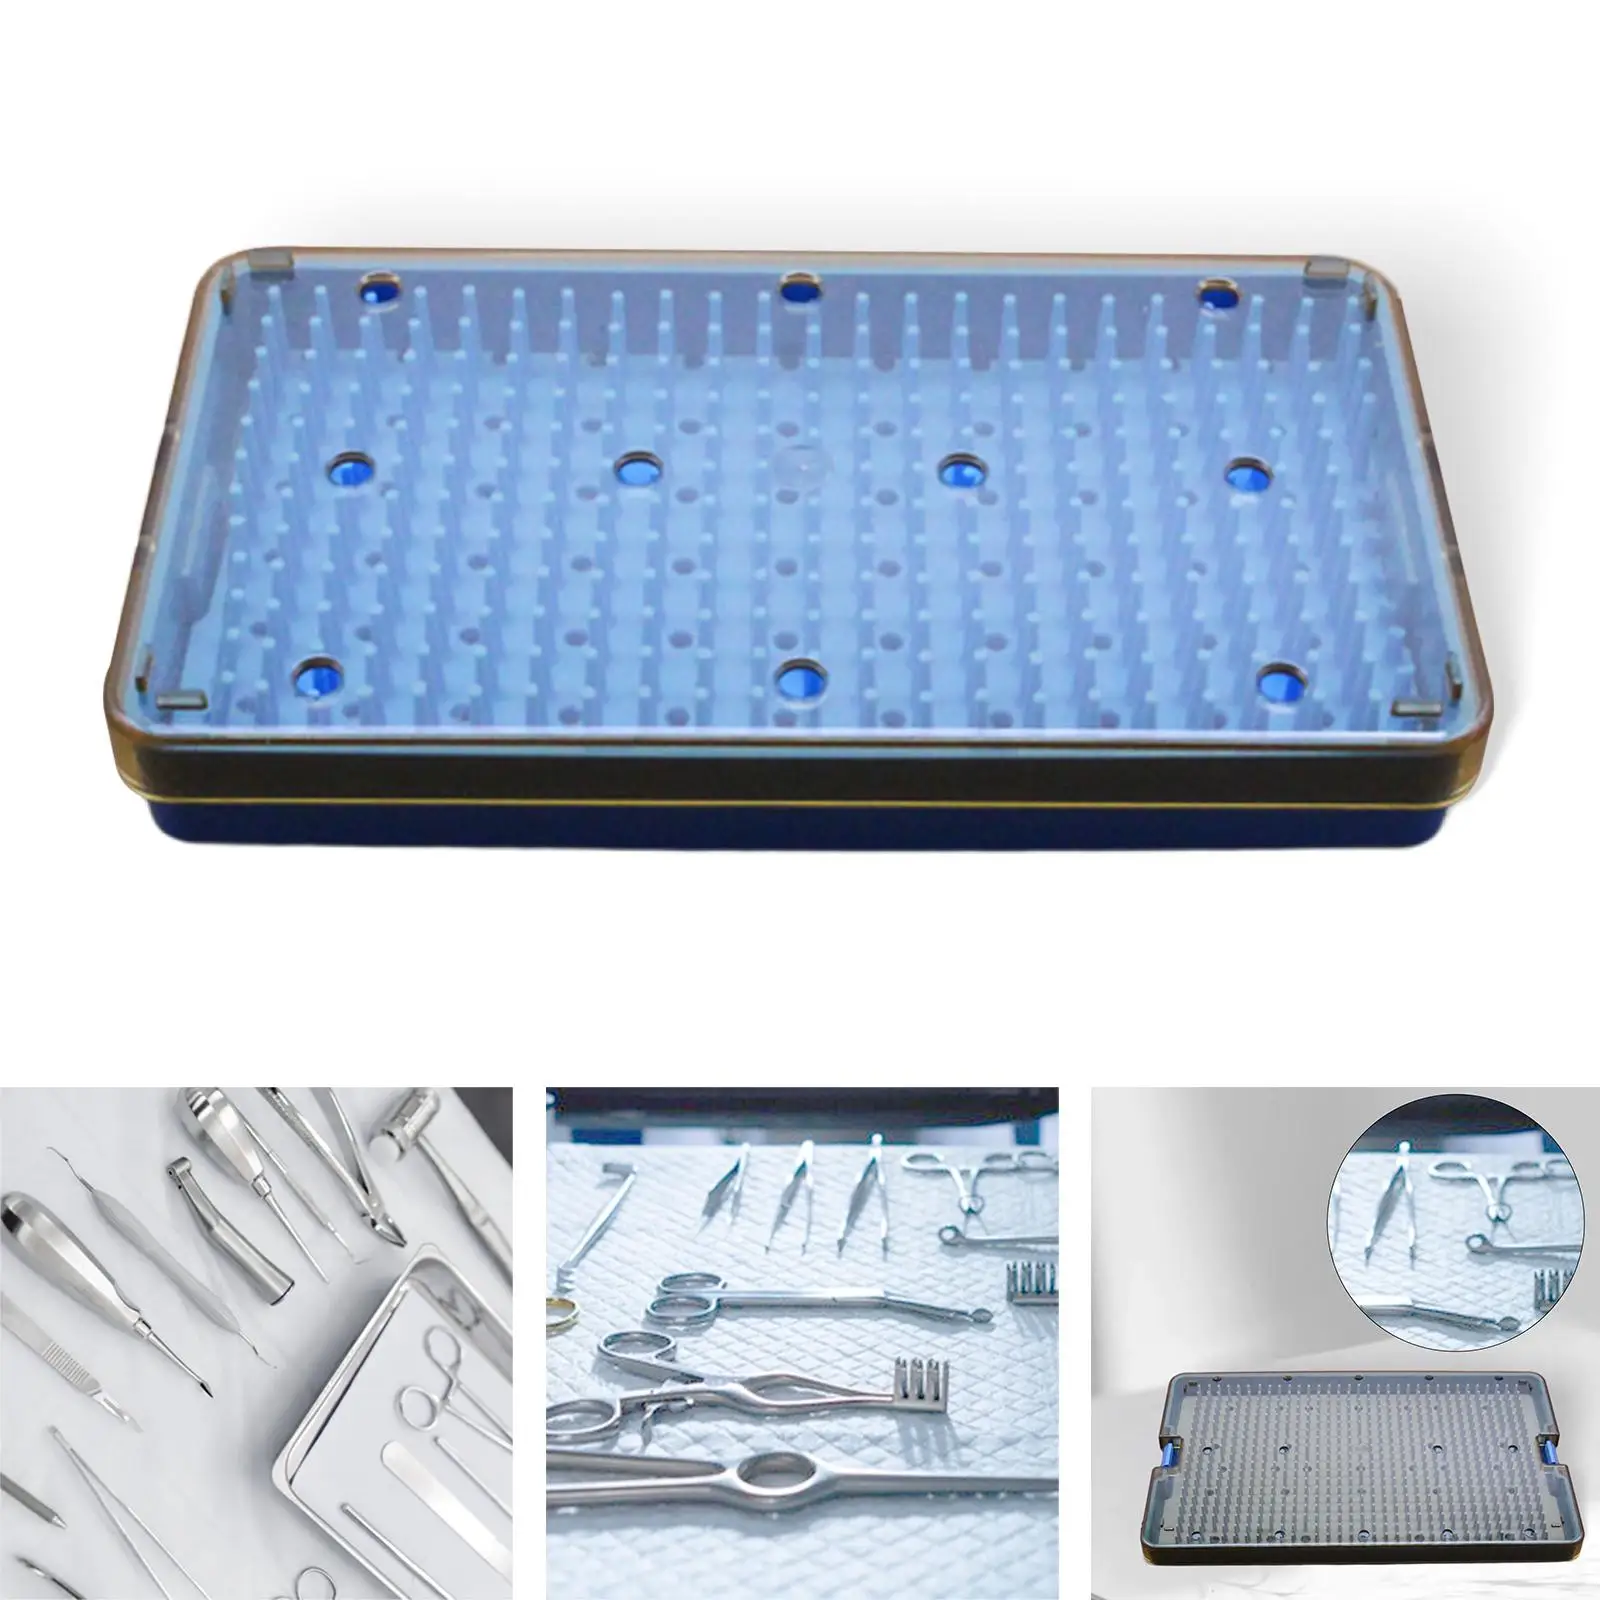 Sterilization Cassette Rack Box Easy to Clean Instruments Disinfection Box Autoclavable Box Sterilization Tray for Ophthalmic